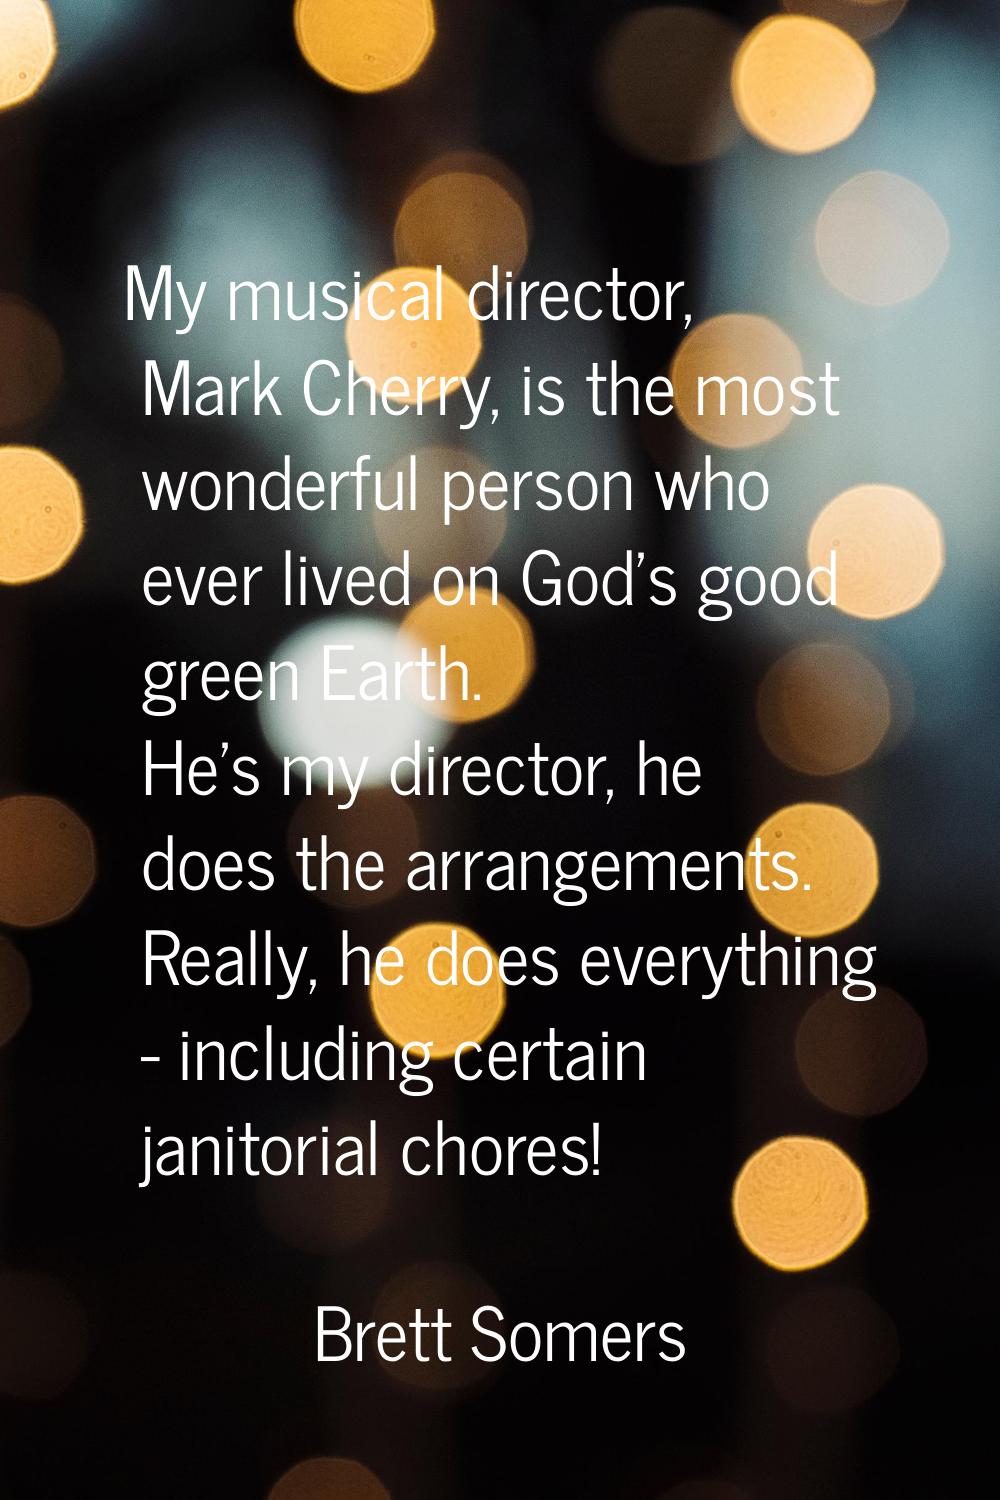 My musical director, Mark Cherry, is the most wonderful person who ever lived on God's good green E